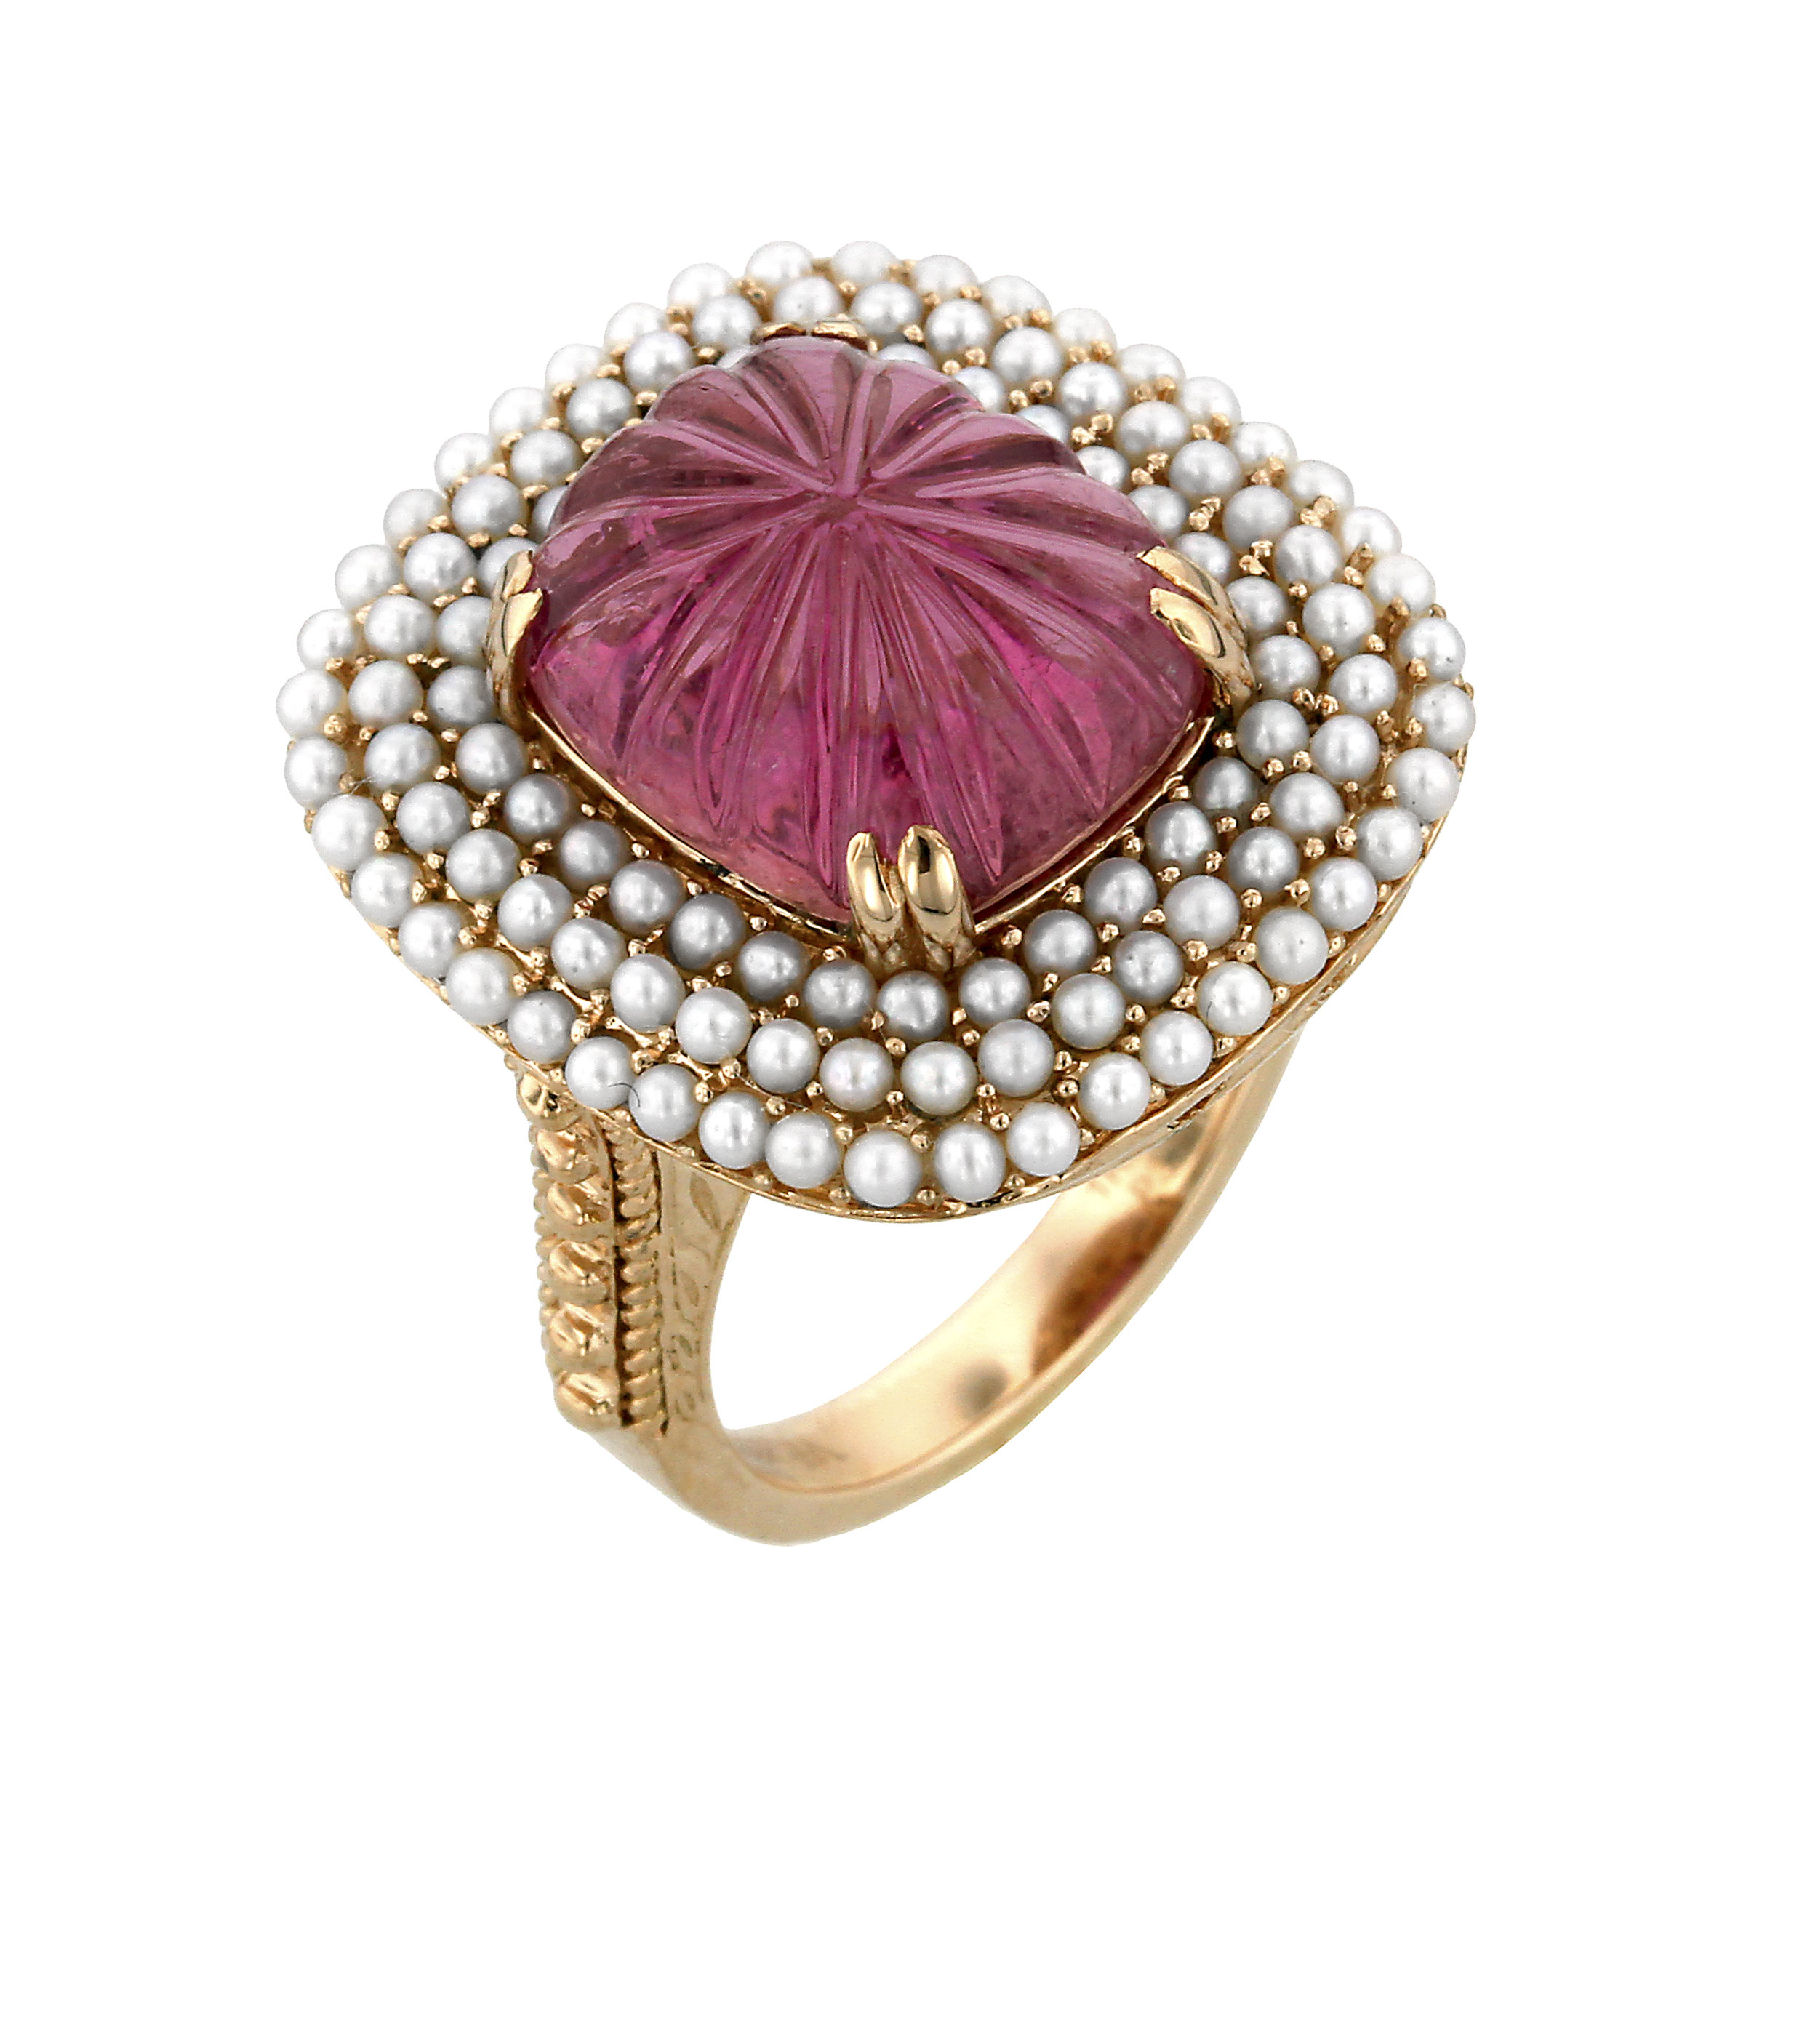 Carved Tourmaline and Pearl Ring